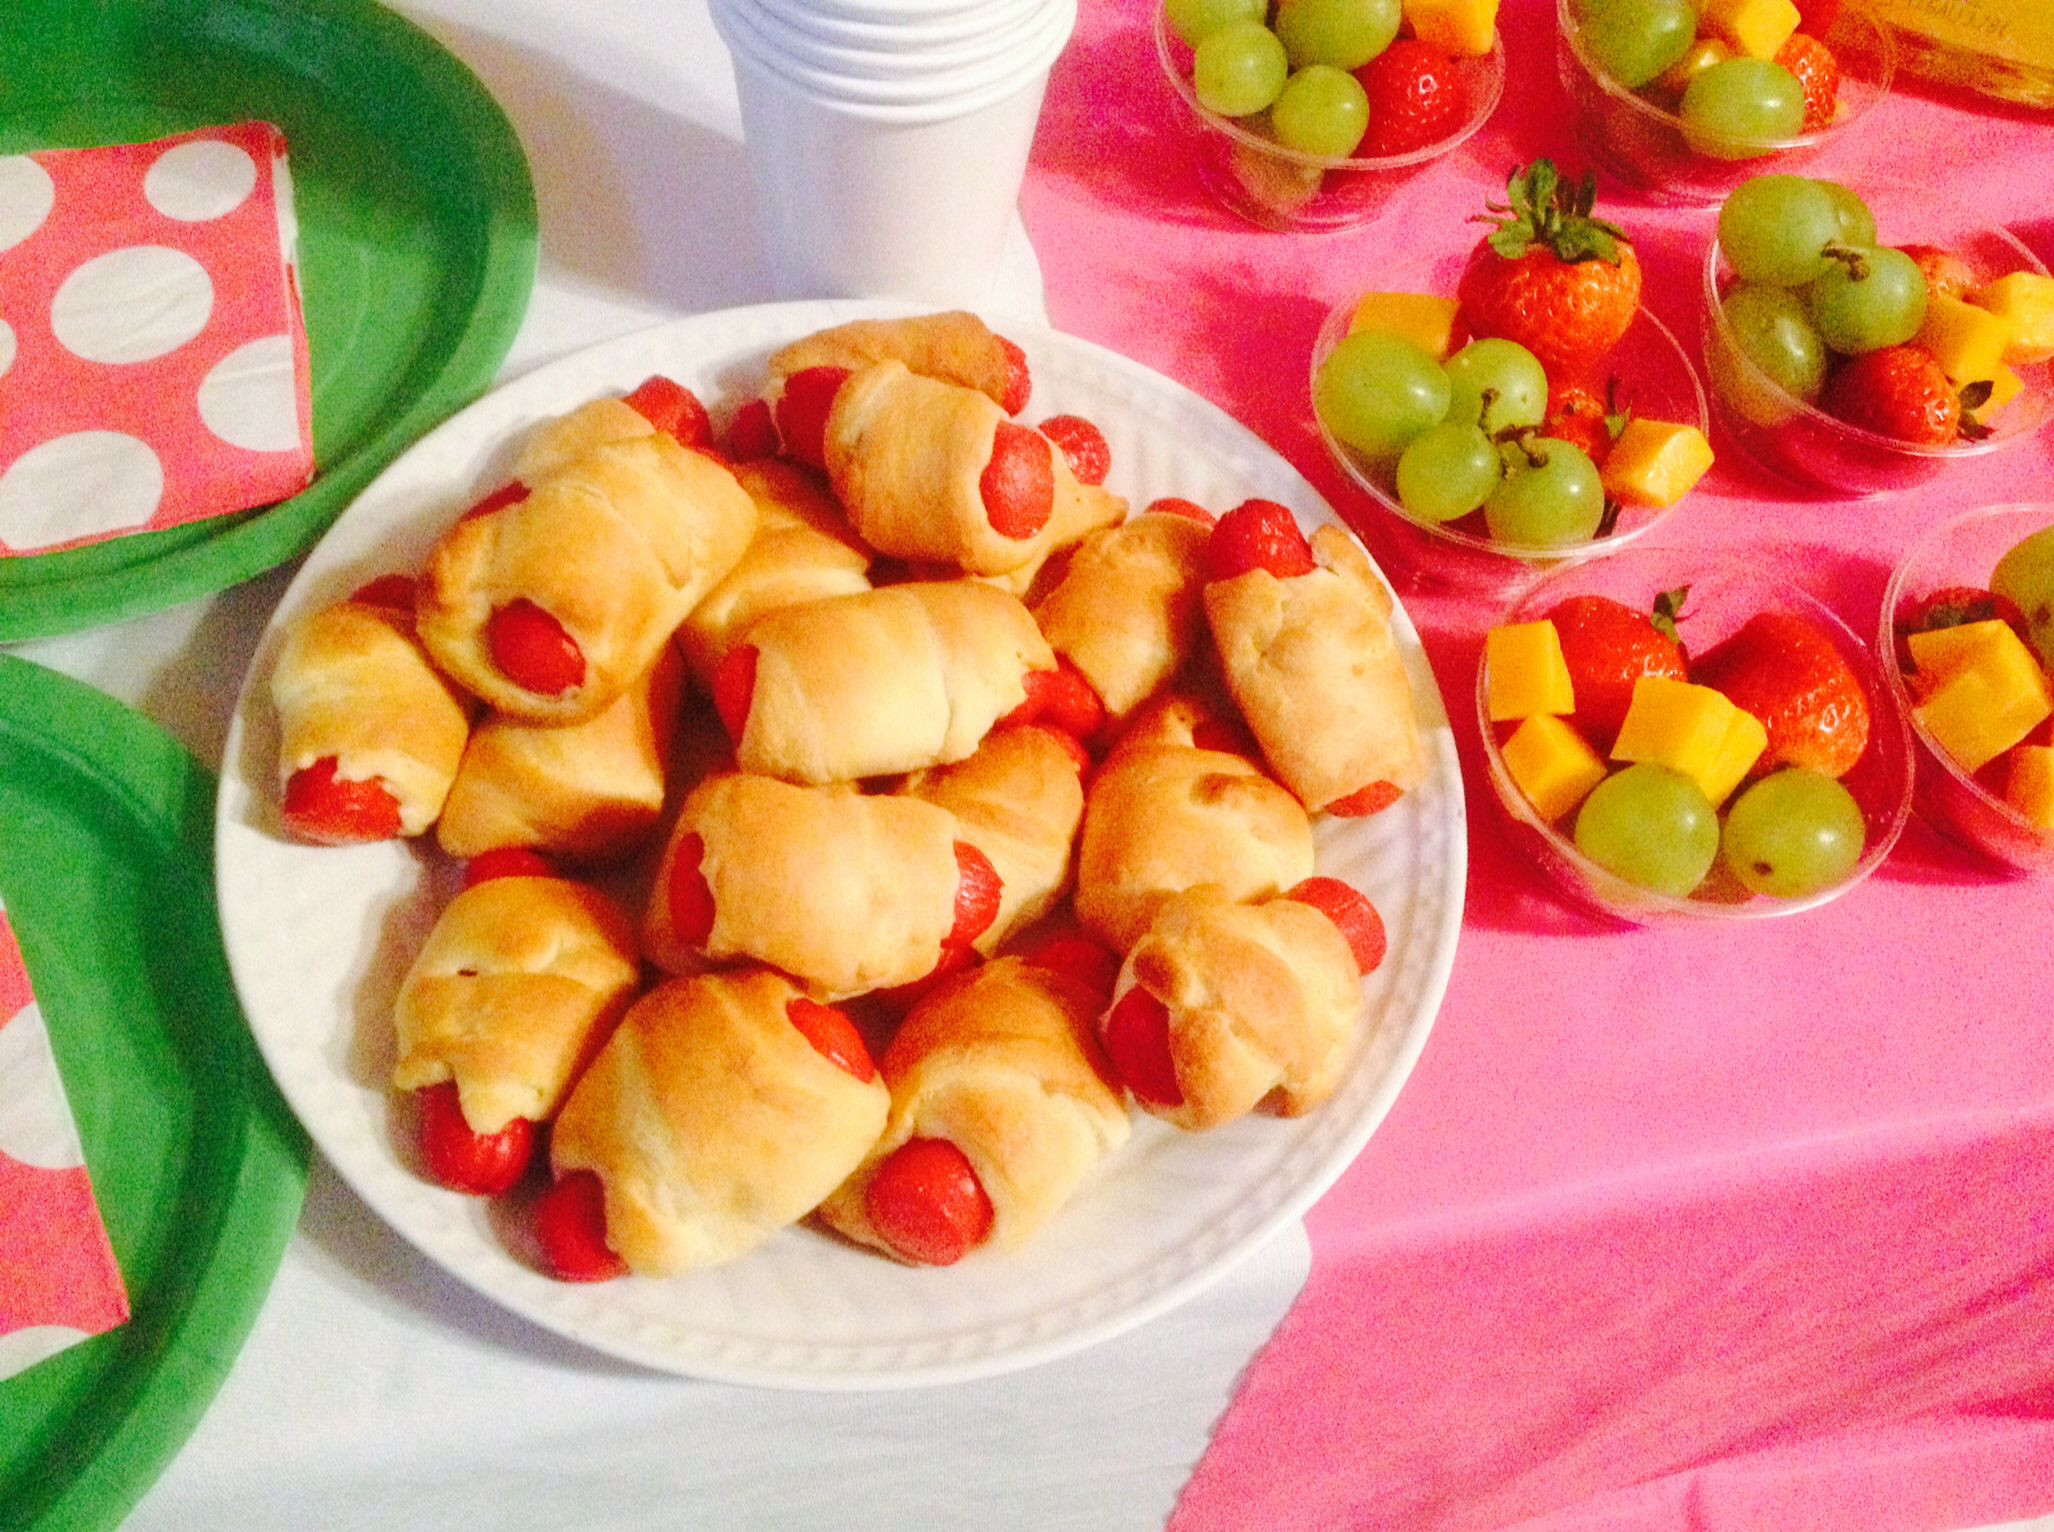 Tea Party Food Ideas For Toddlers
 Girls tea party food ideas